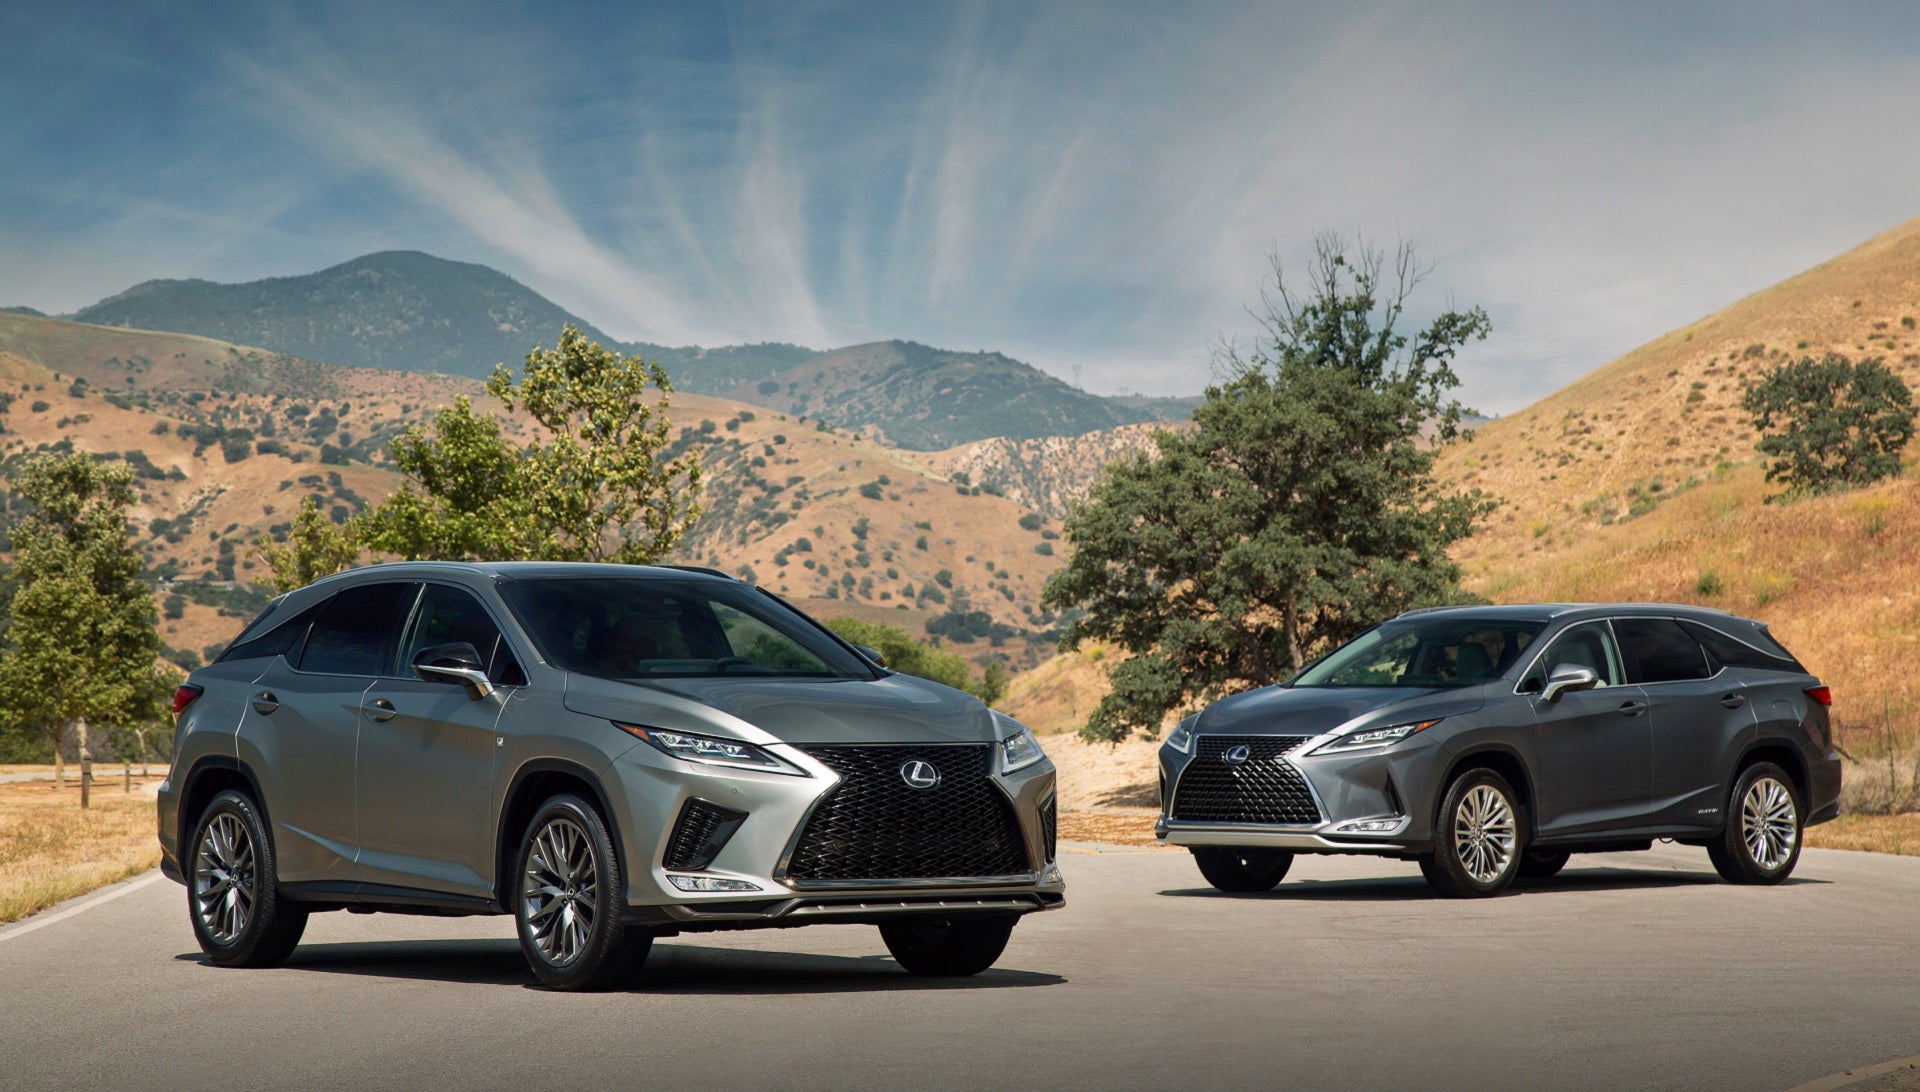 2020 Lexus RX and RXL: A Slight Refresh Takes This Luxury SUV From Edgy to Elegant